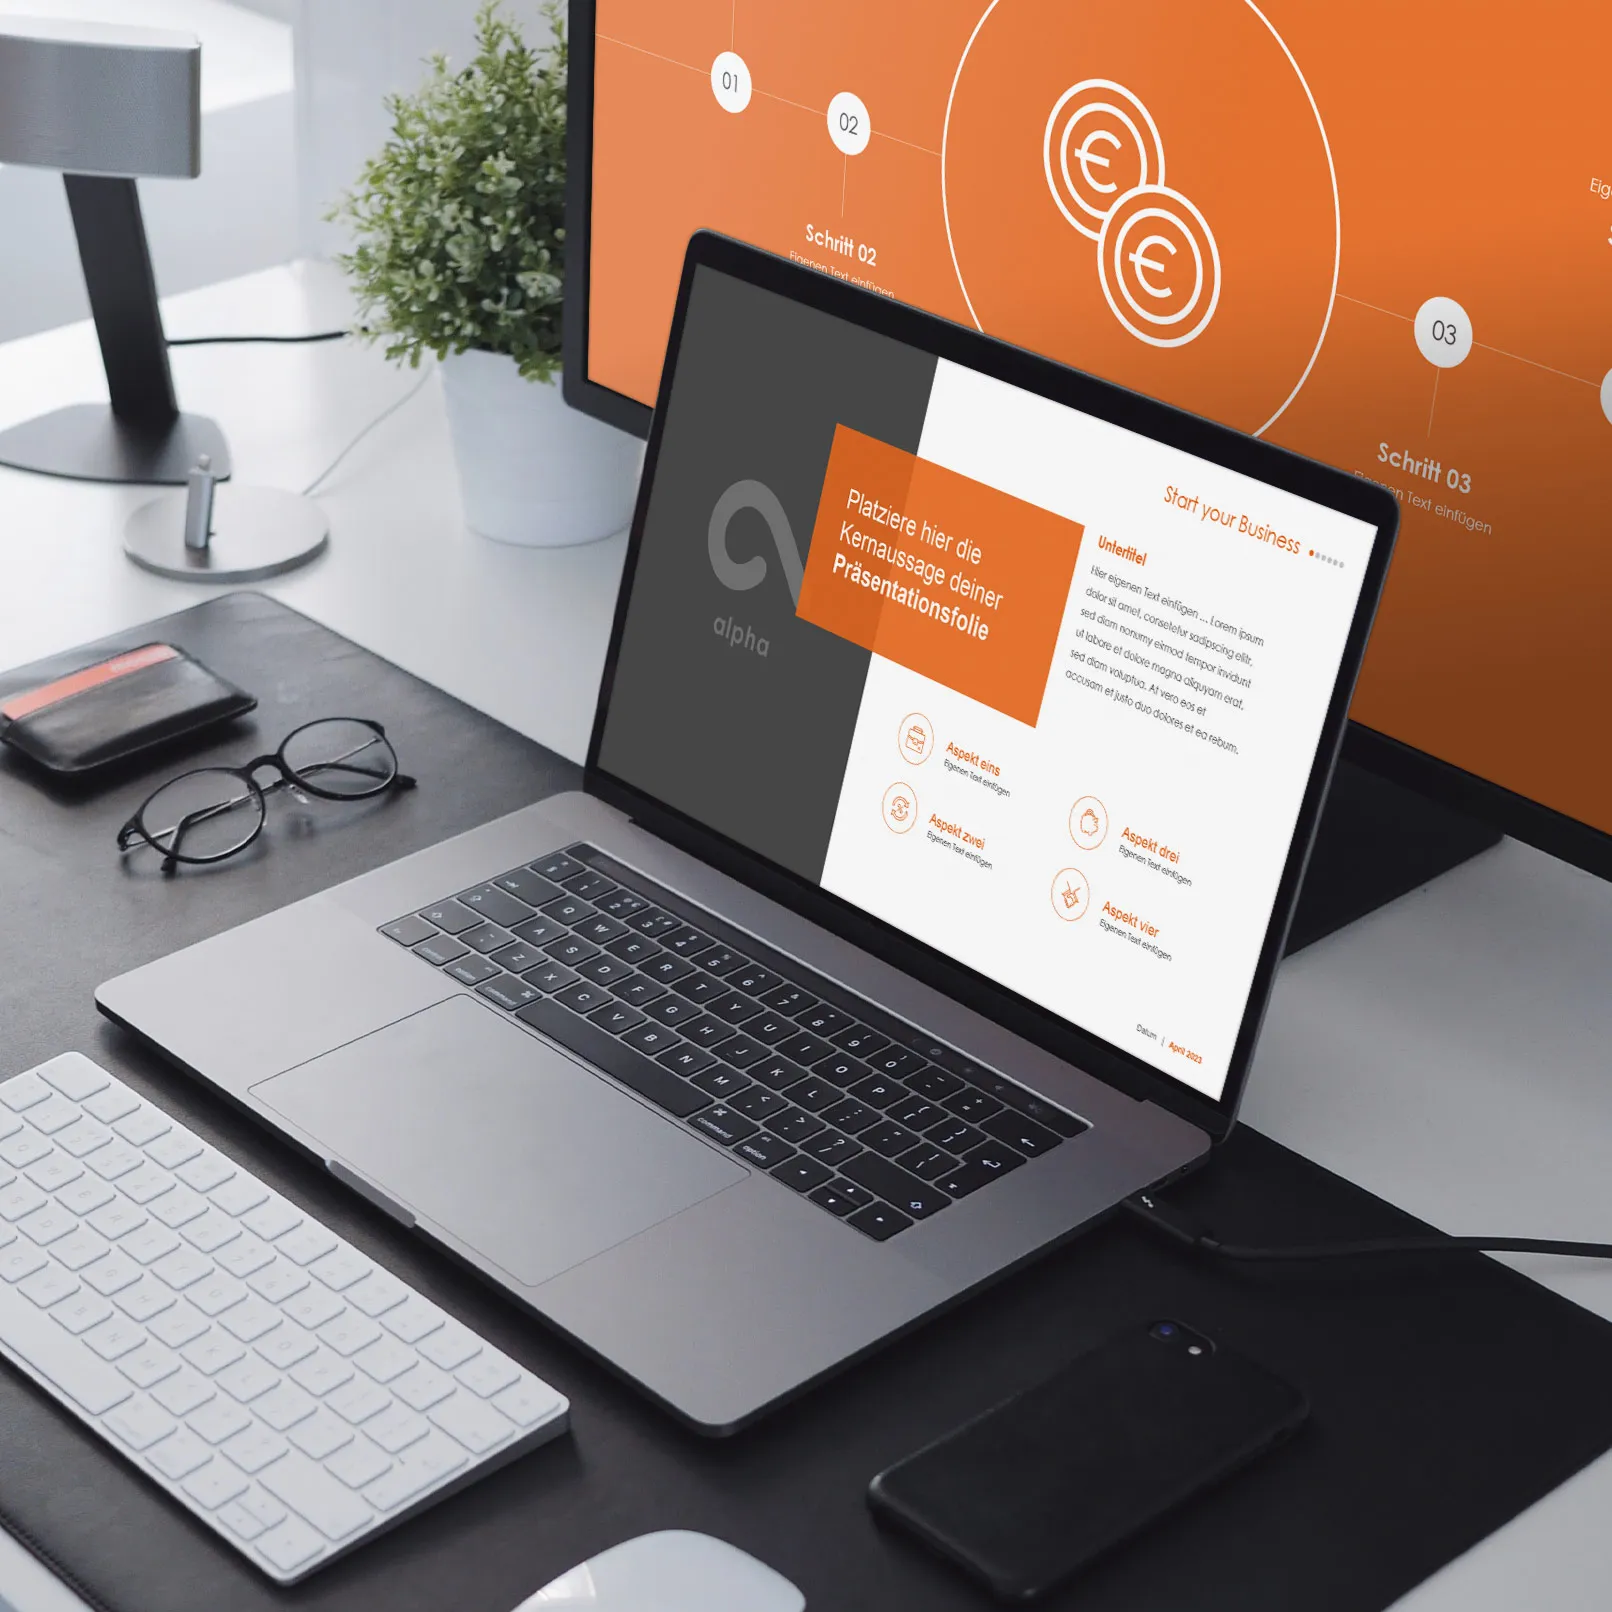 PowerPoint templates for business presentations: Slide on a laptop